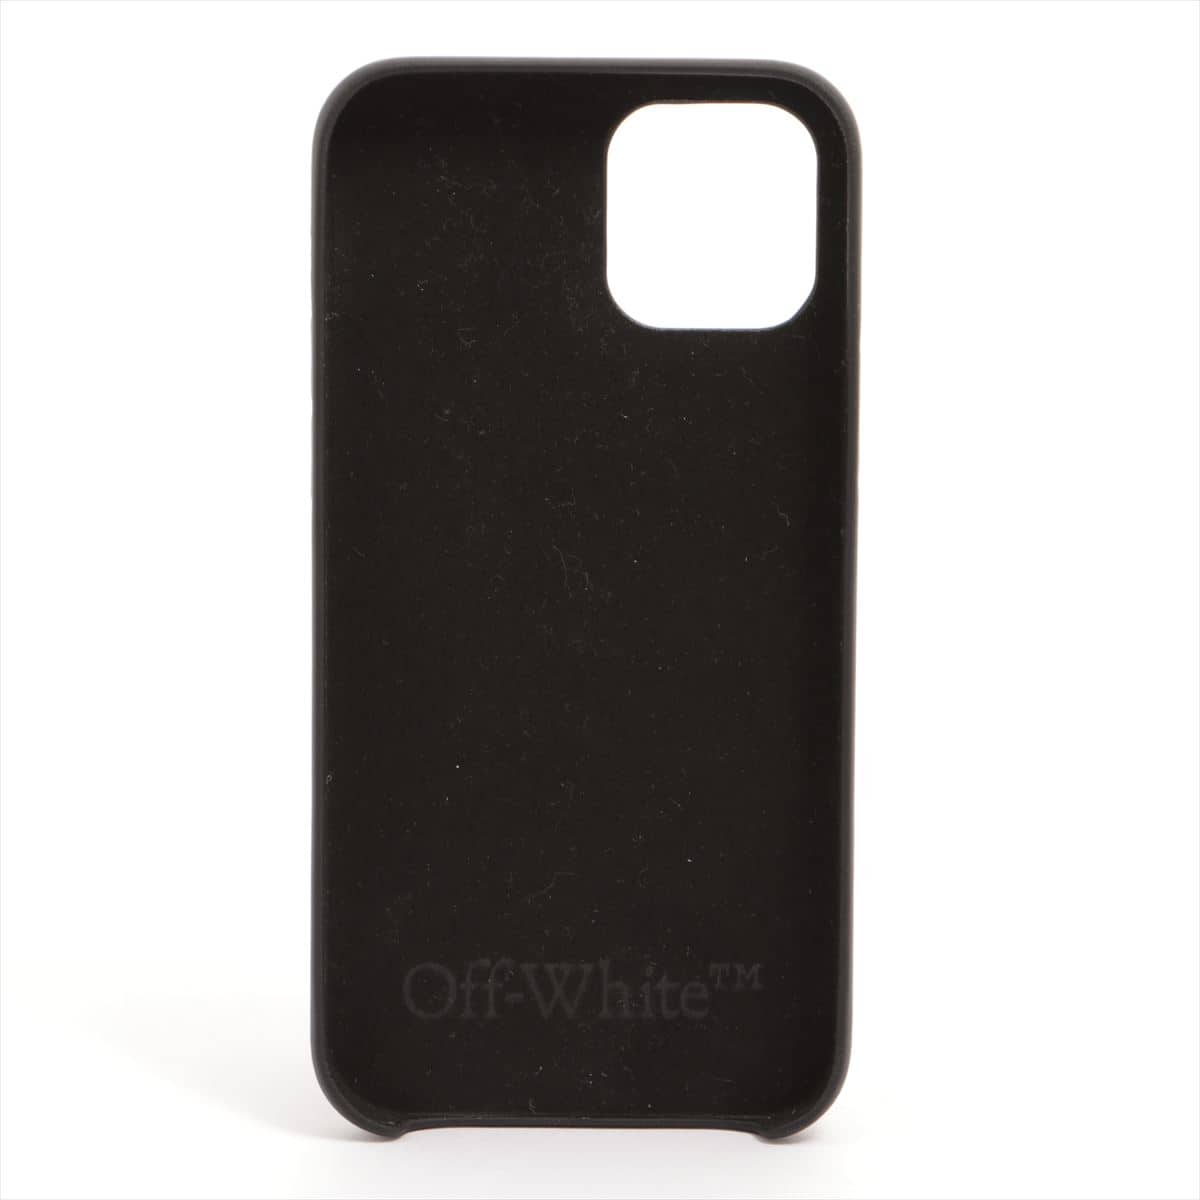 Off-White Silicon Mobile phone case Black iPhone12